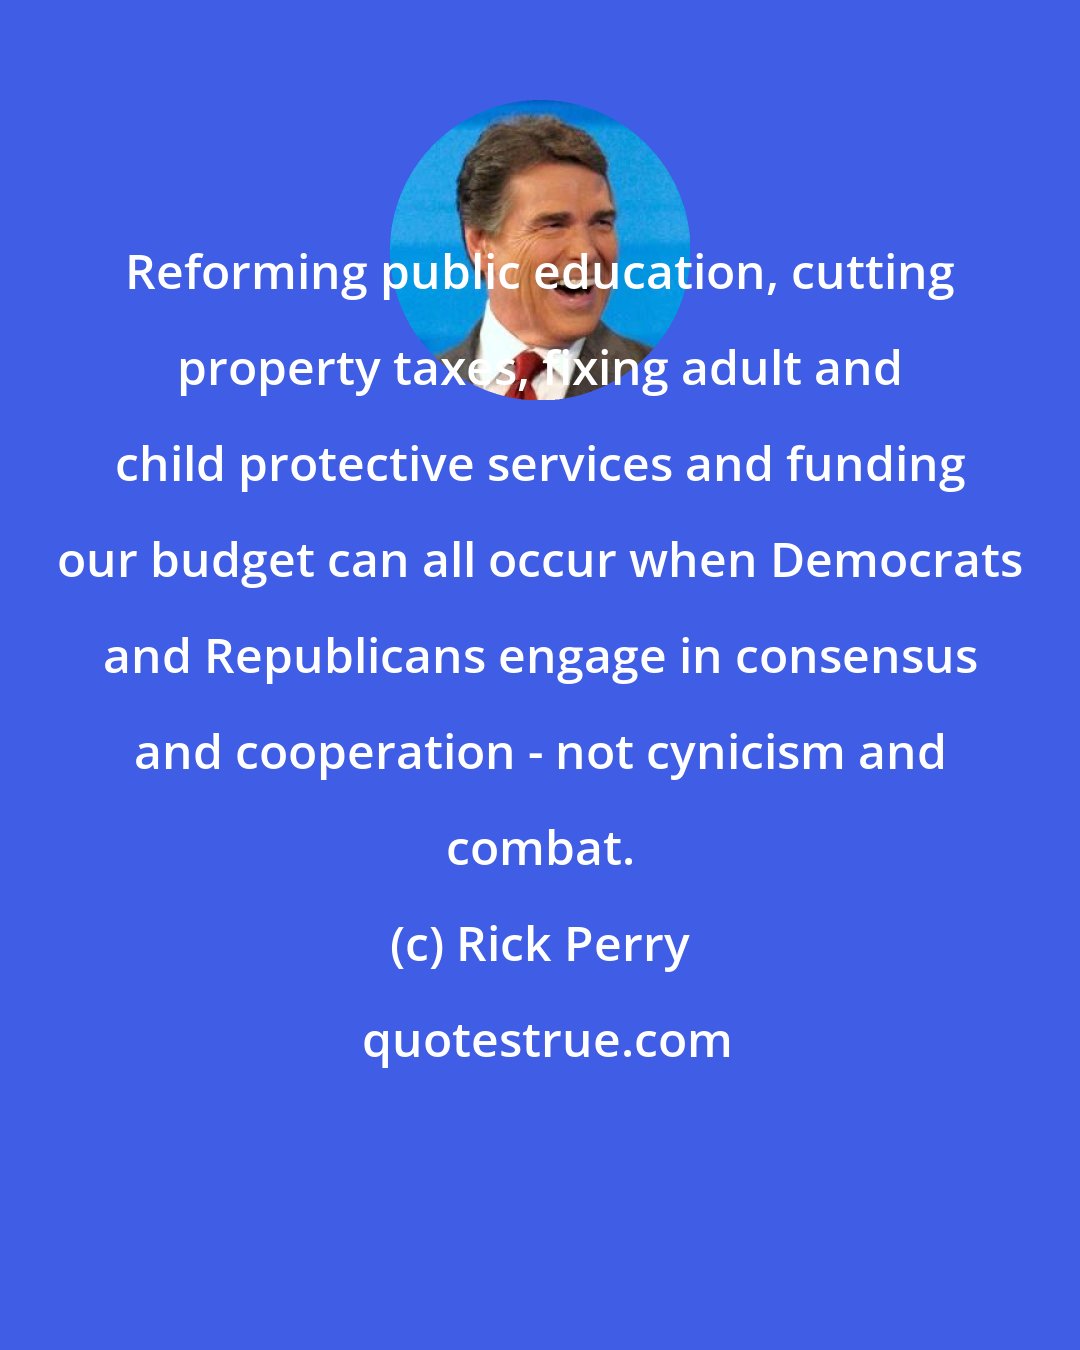 Rick Perry: Reforming public education, cutting property taxes, fixing adult and child protective services and funding our budget can all occur when Democrats and Republicans engage in consensus and cooperation - not cynicism and combat.